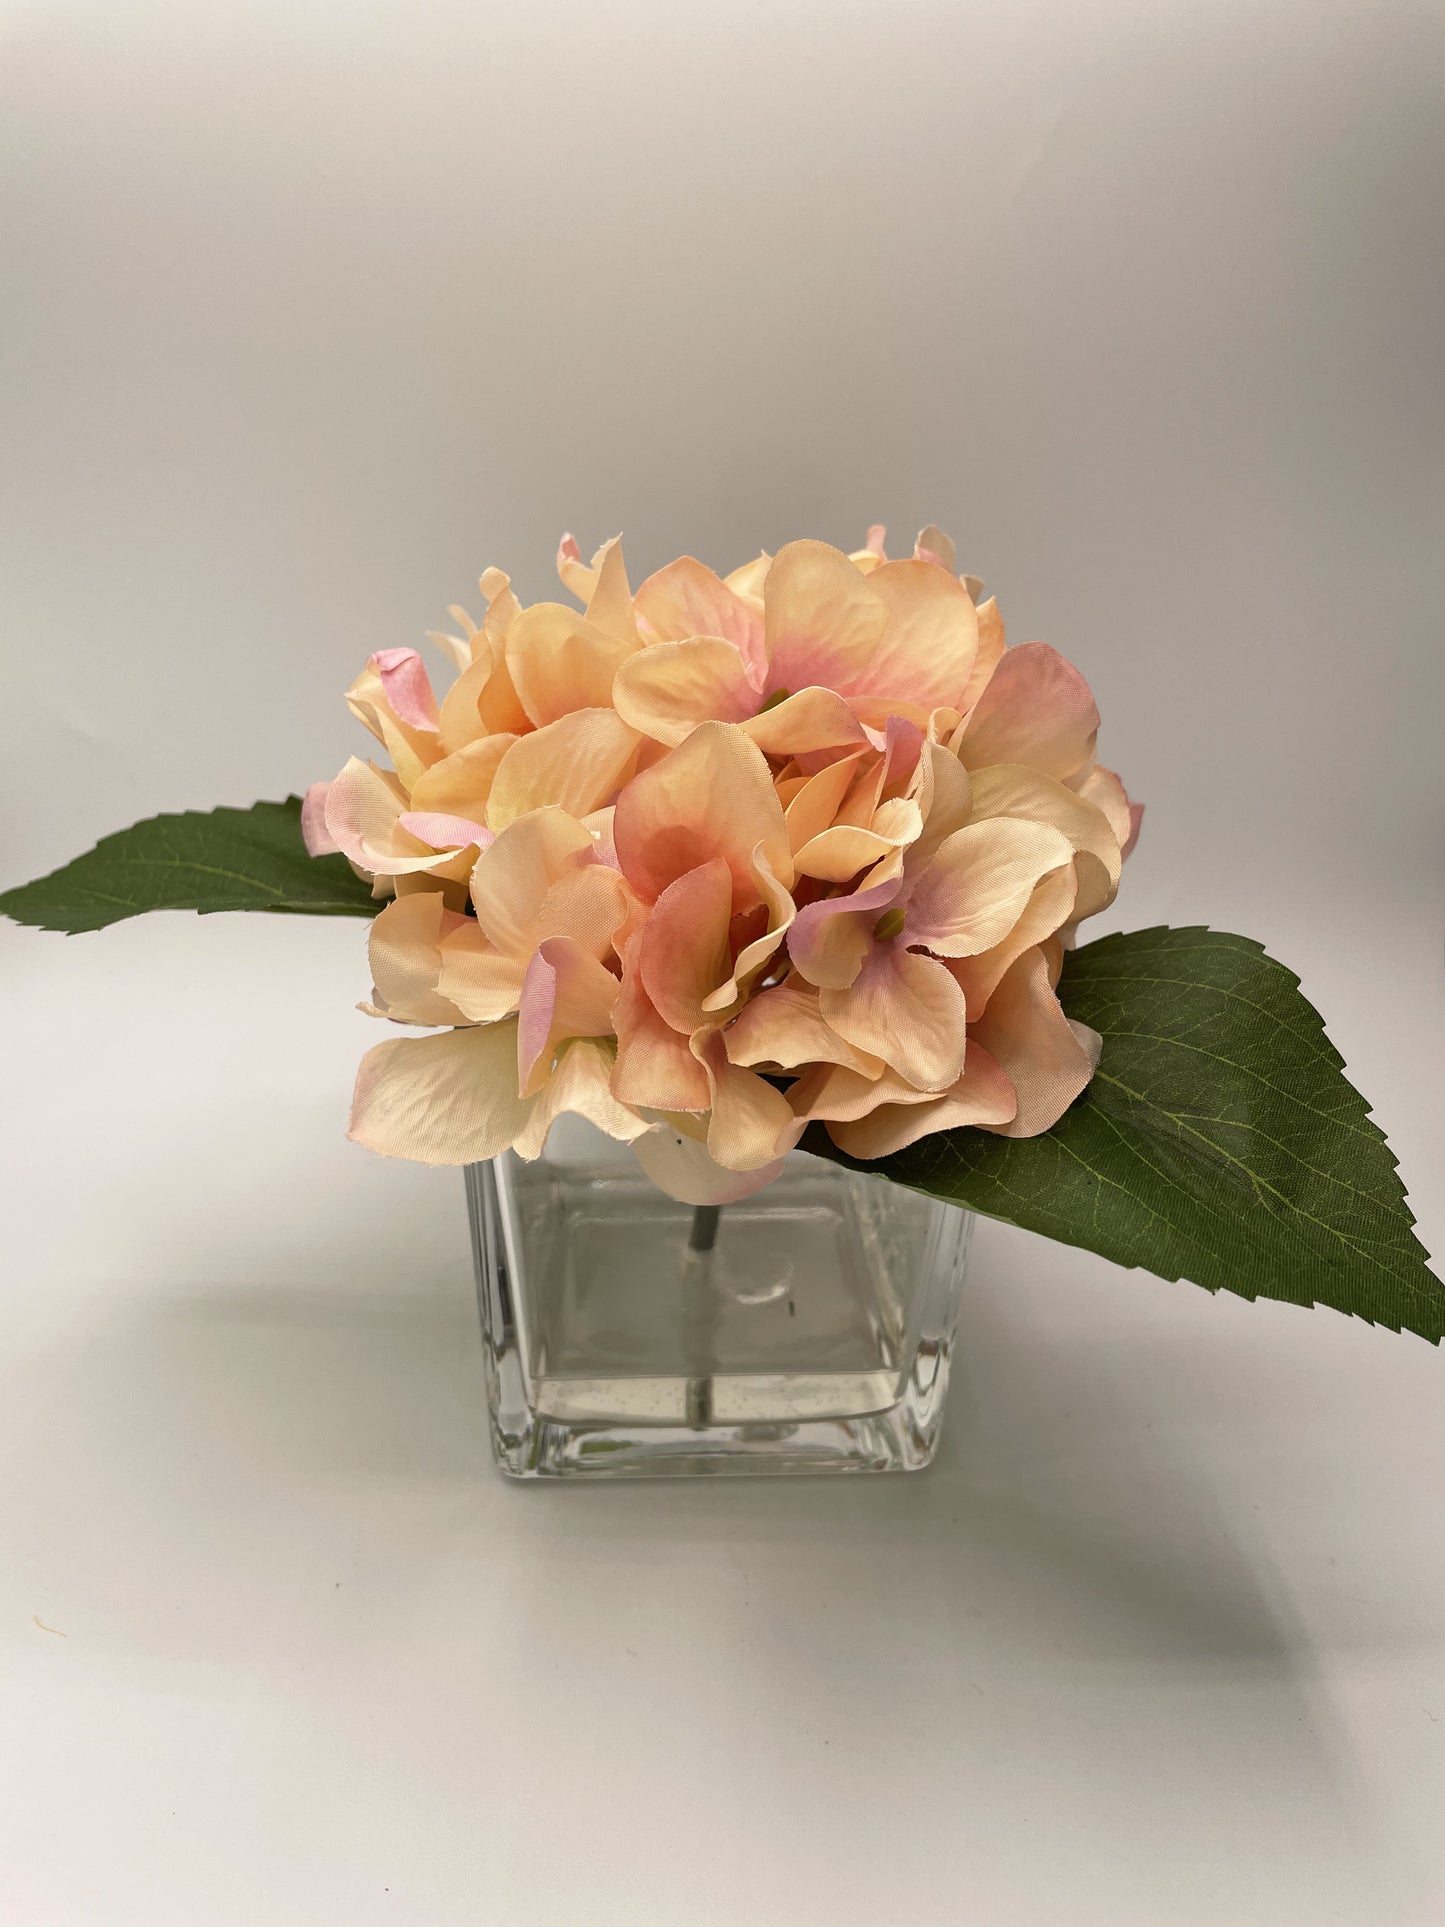 5" Artificial Pink Hydrangea fixed in a Glass Cube